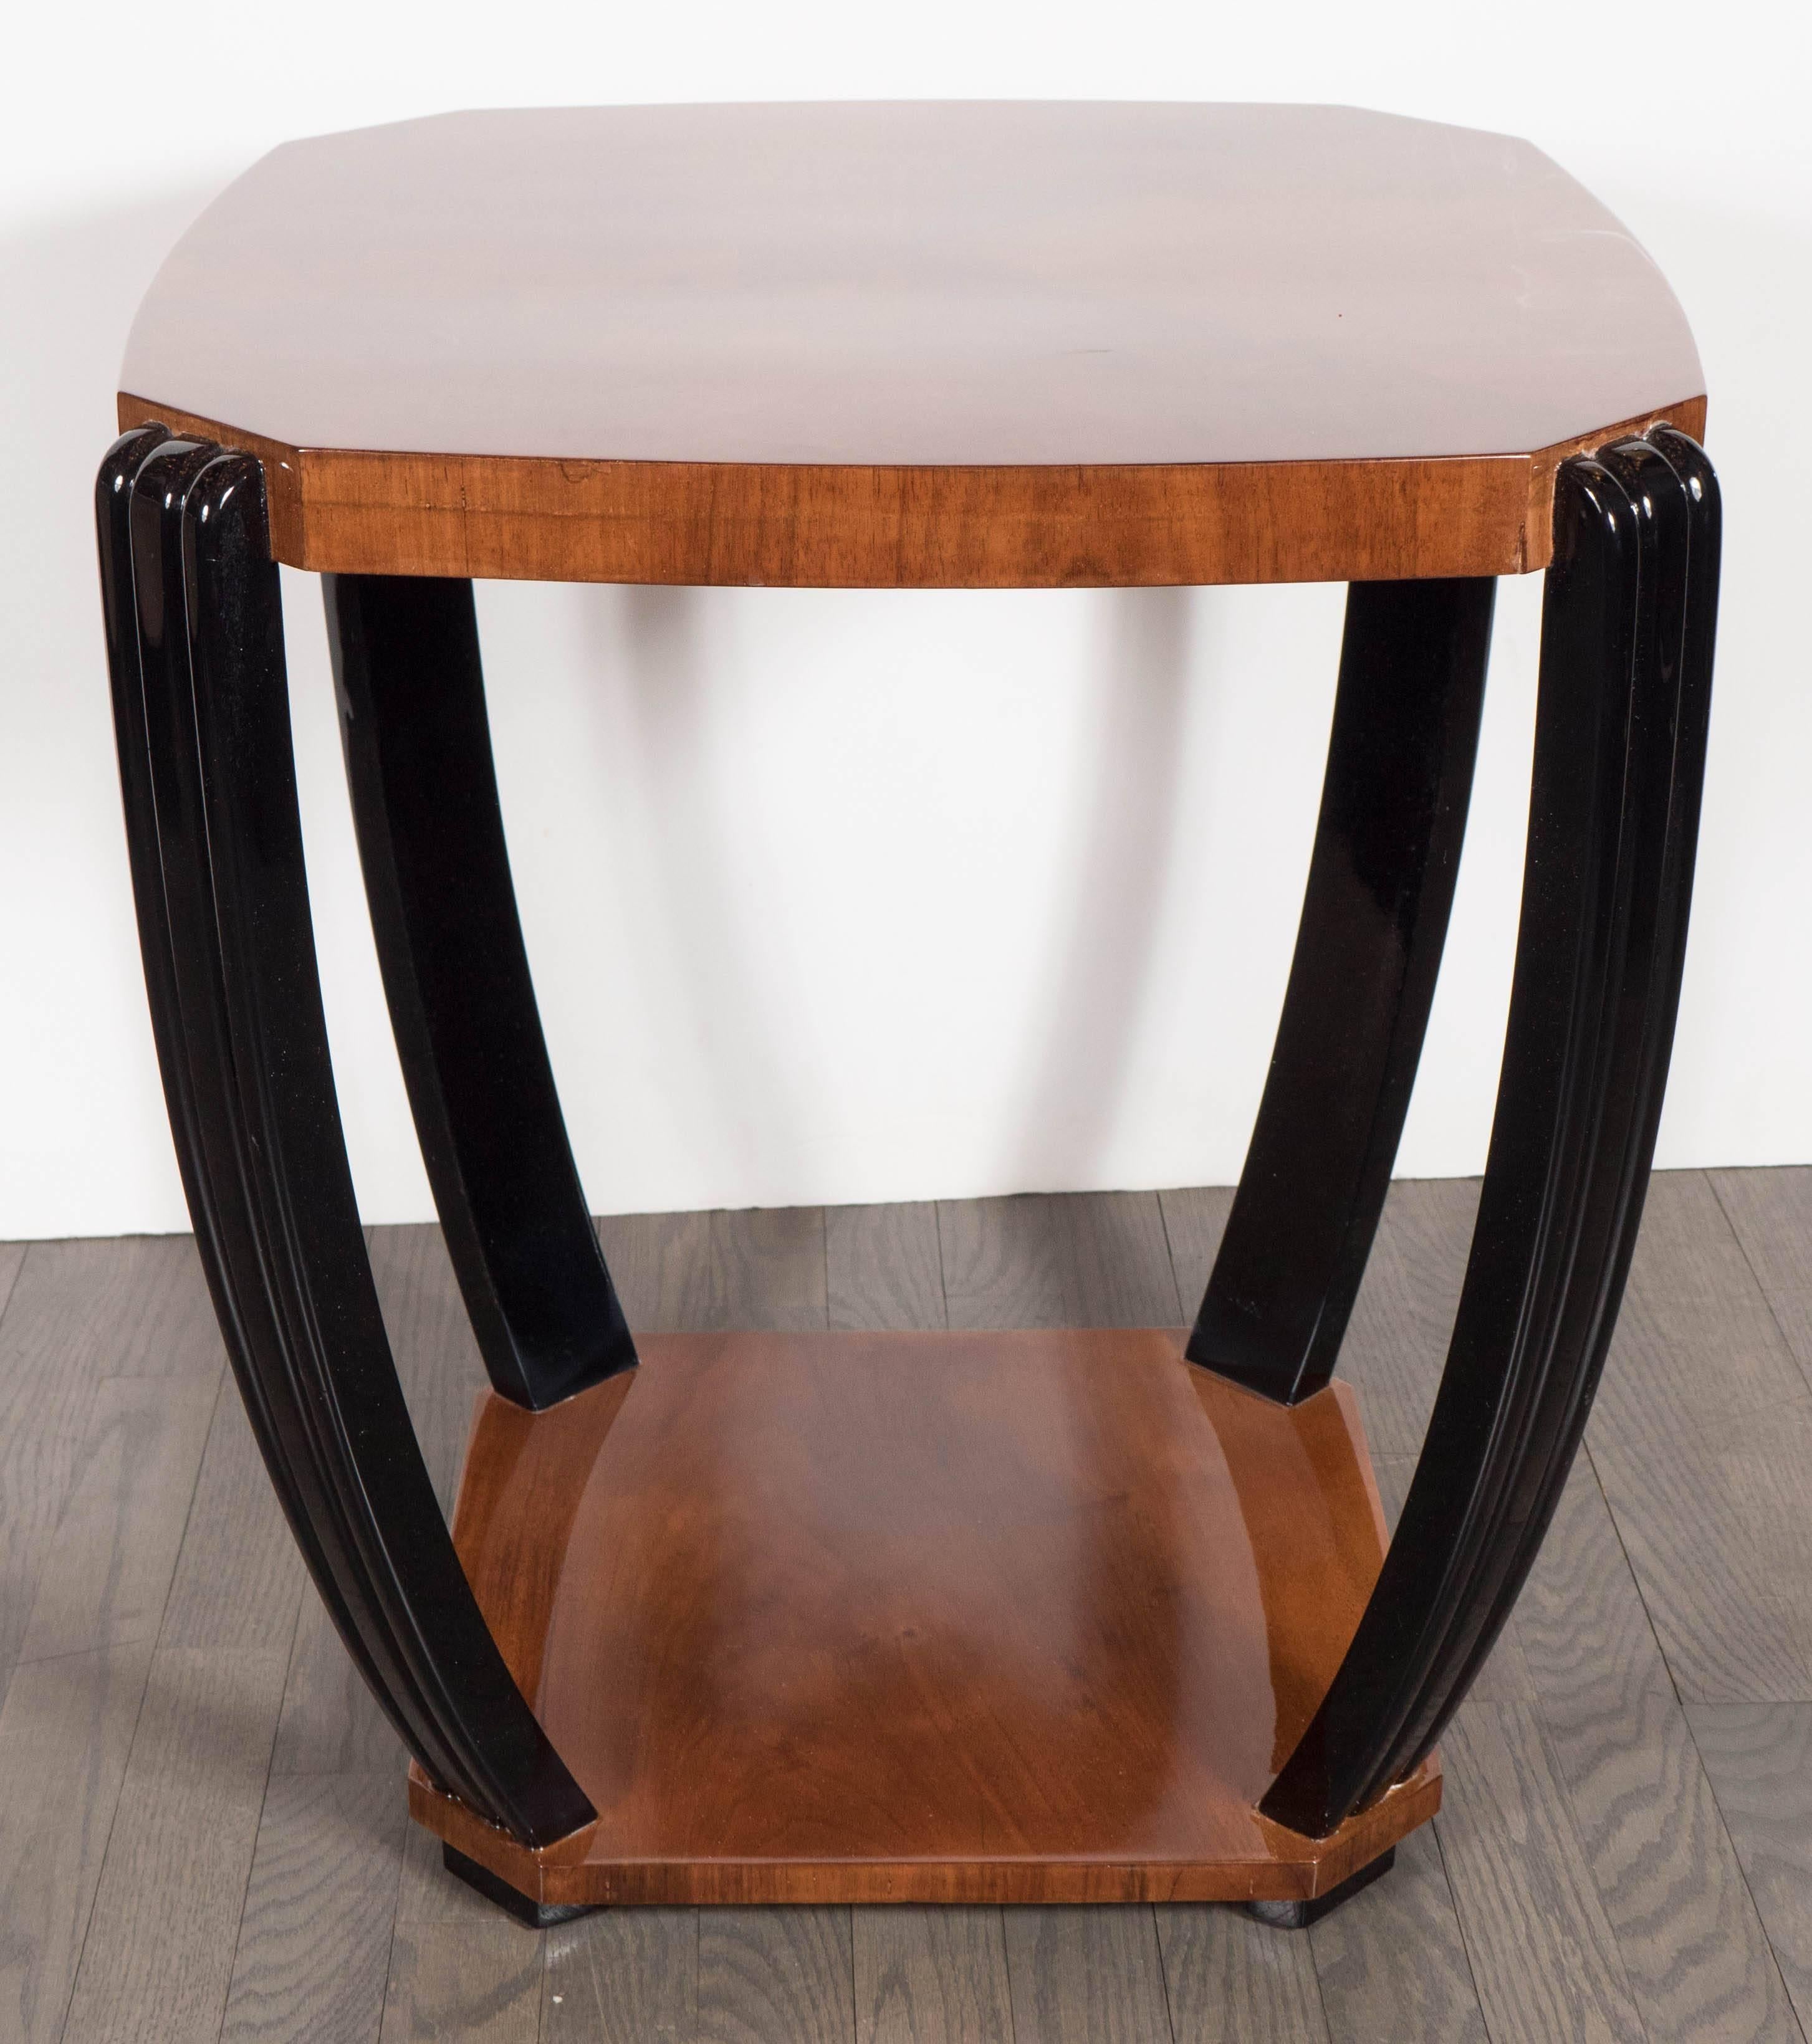 An Art Deco streamlined bookmatched burled walnut occasional table. Lacquered fluted legs with ribbed detailing connect the base to a polished, symmetrical-cut slightly curved top. This piece has been restored to mint condition.